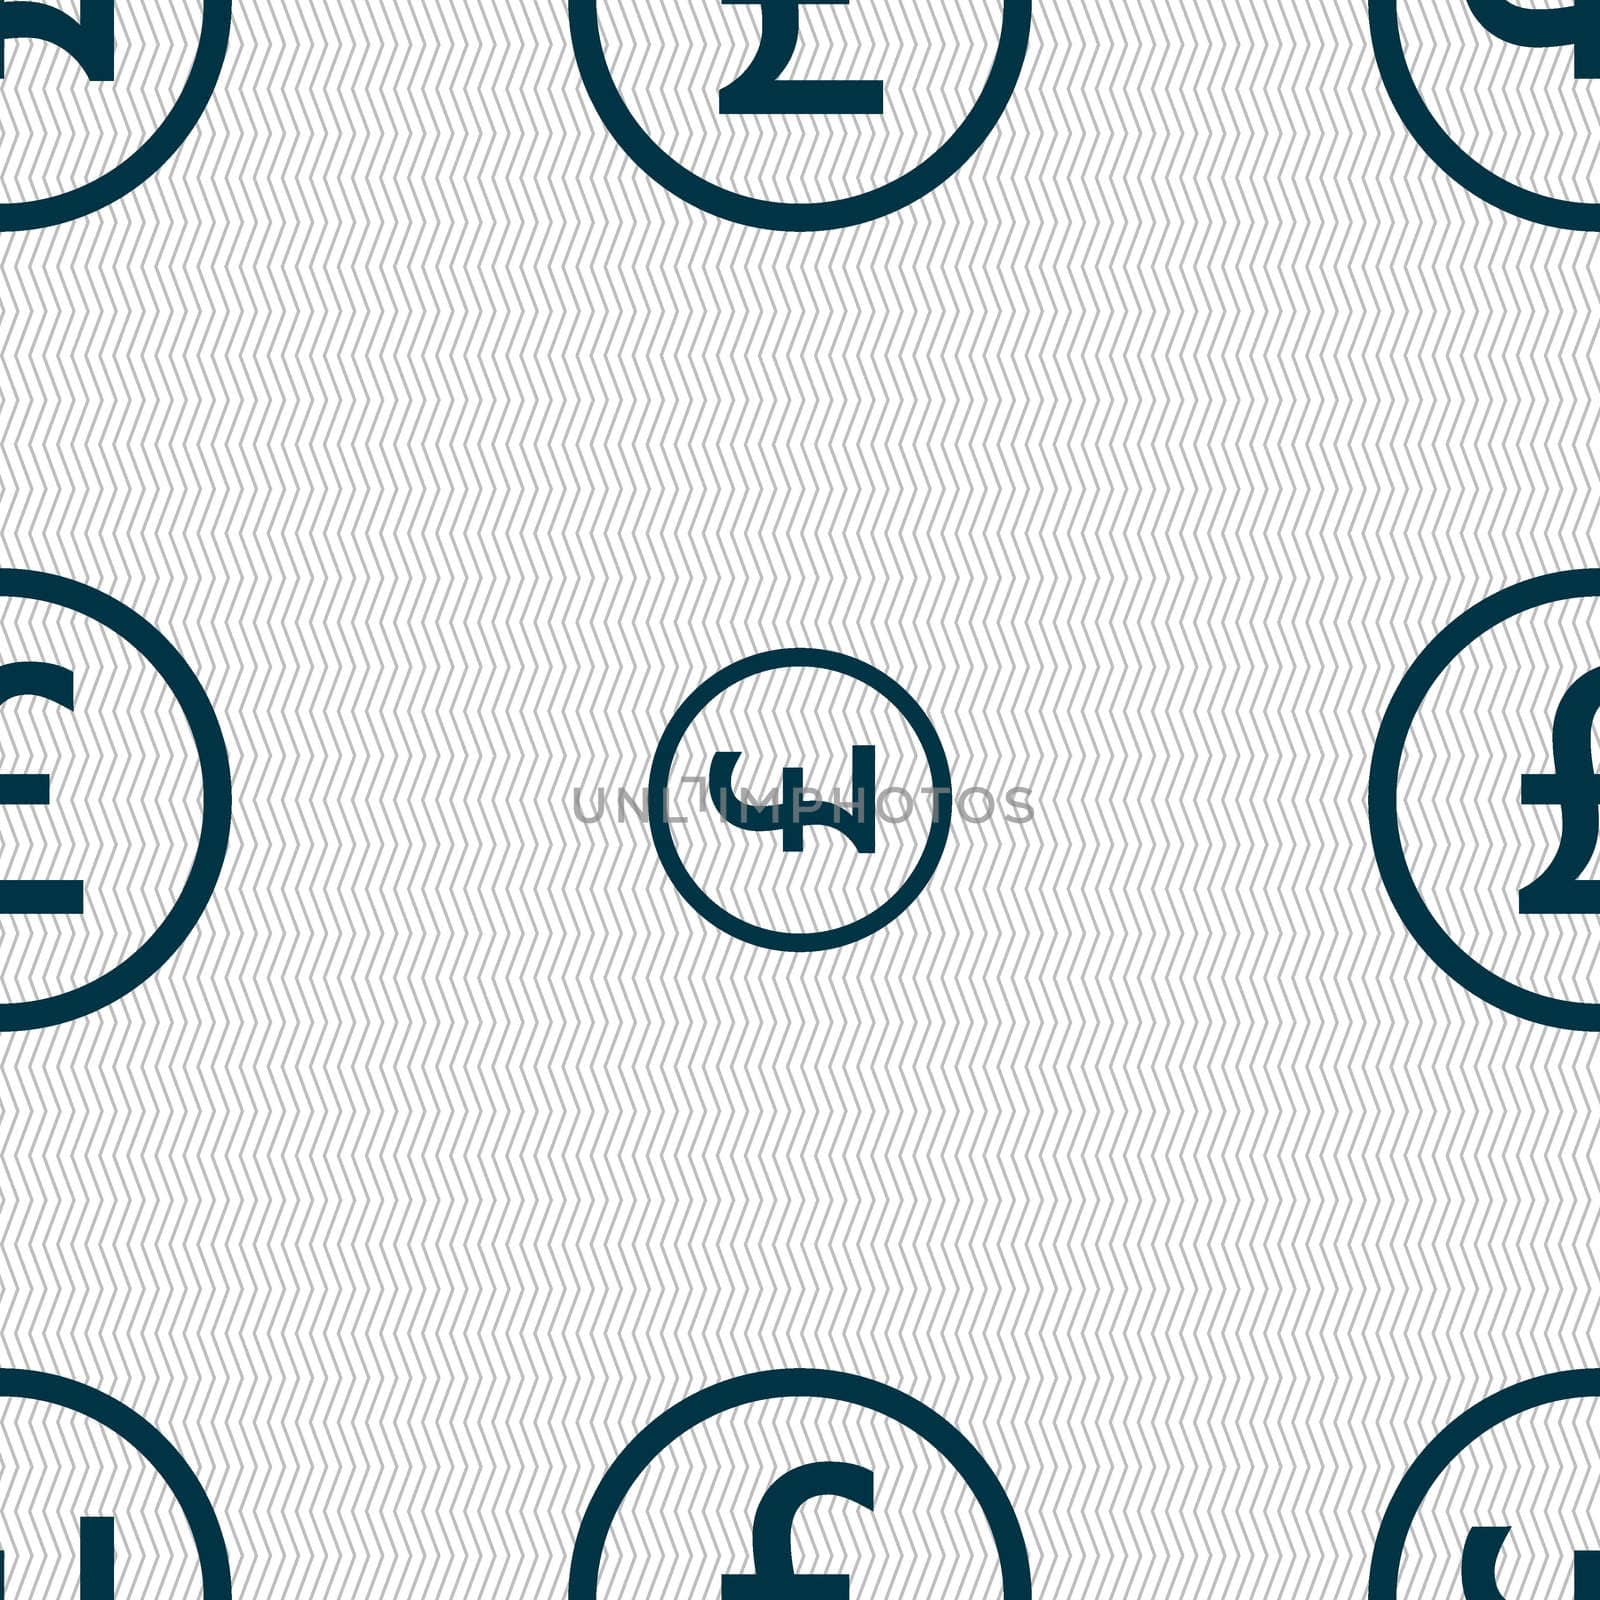 Pound sterling icon sign. Seamless abstract background with geometric shapes. illustration